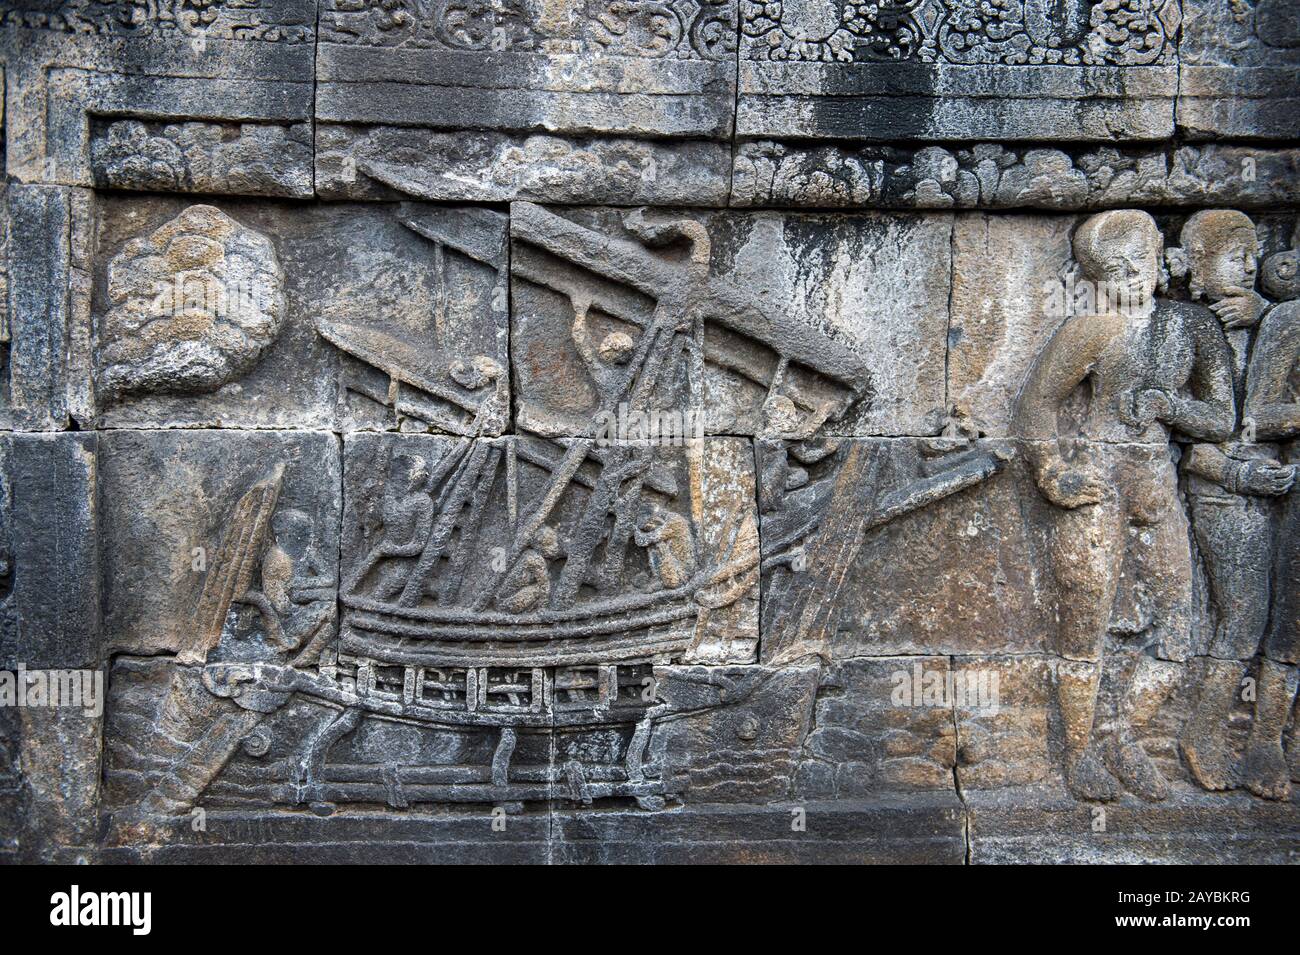 Magelang Heritage largest relief bas Buddhist Photo ship a world temple Site, - ninth-century), World in temple Alamy carving of A at in (UNESCO Stock Borobudur the the